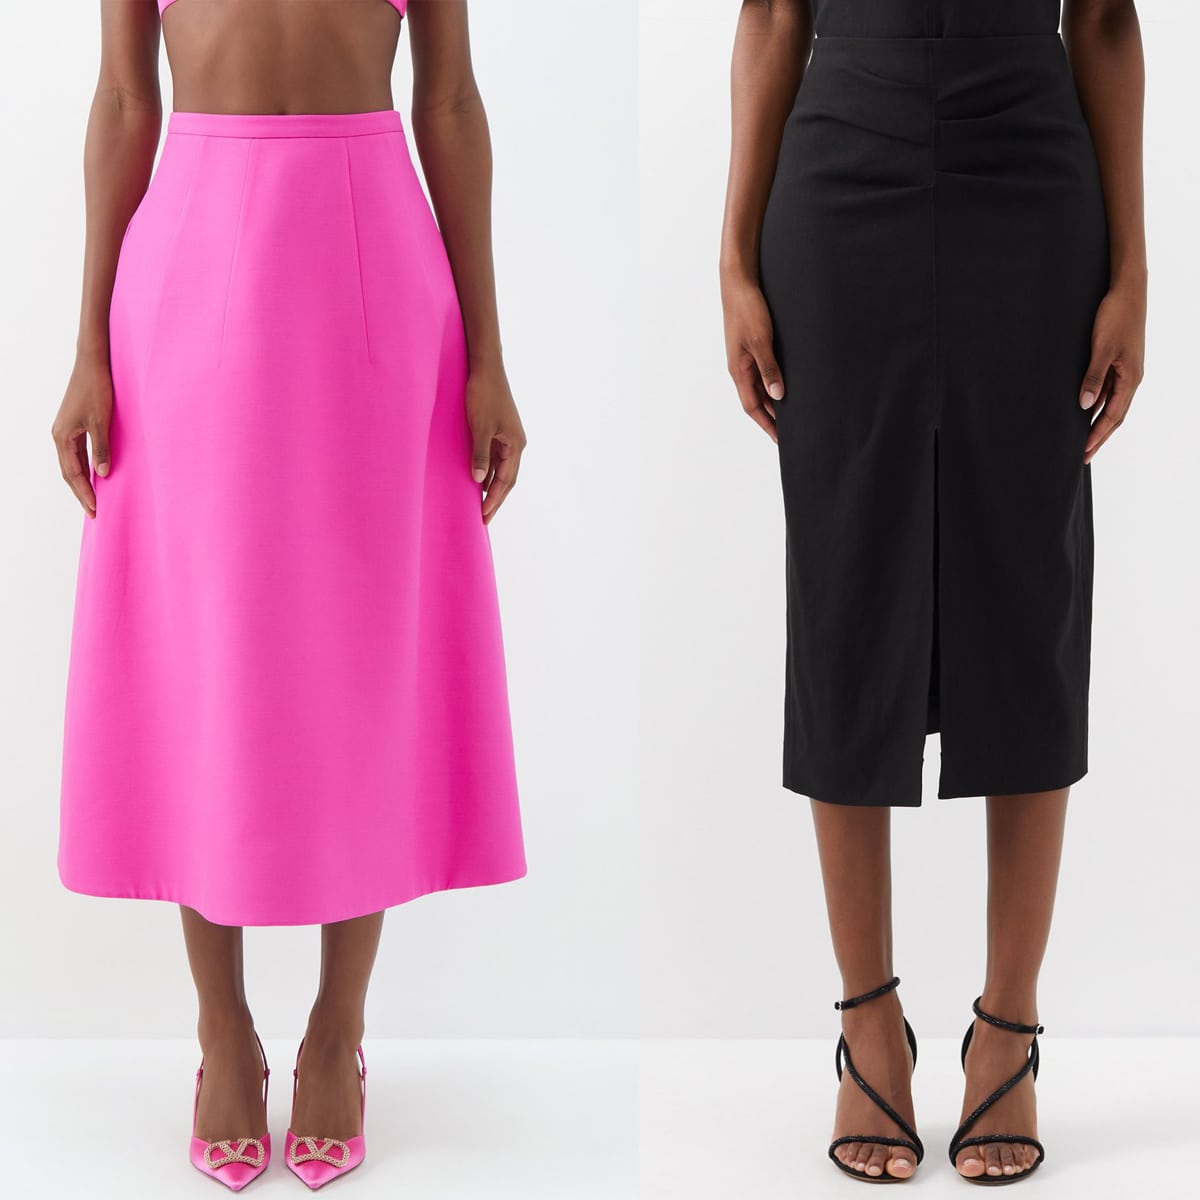 A-line skirts have a letter A silhouette that flares out at the hem, while pencil skirts have a straight silhouette